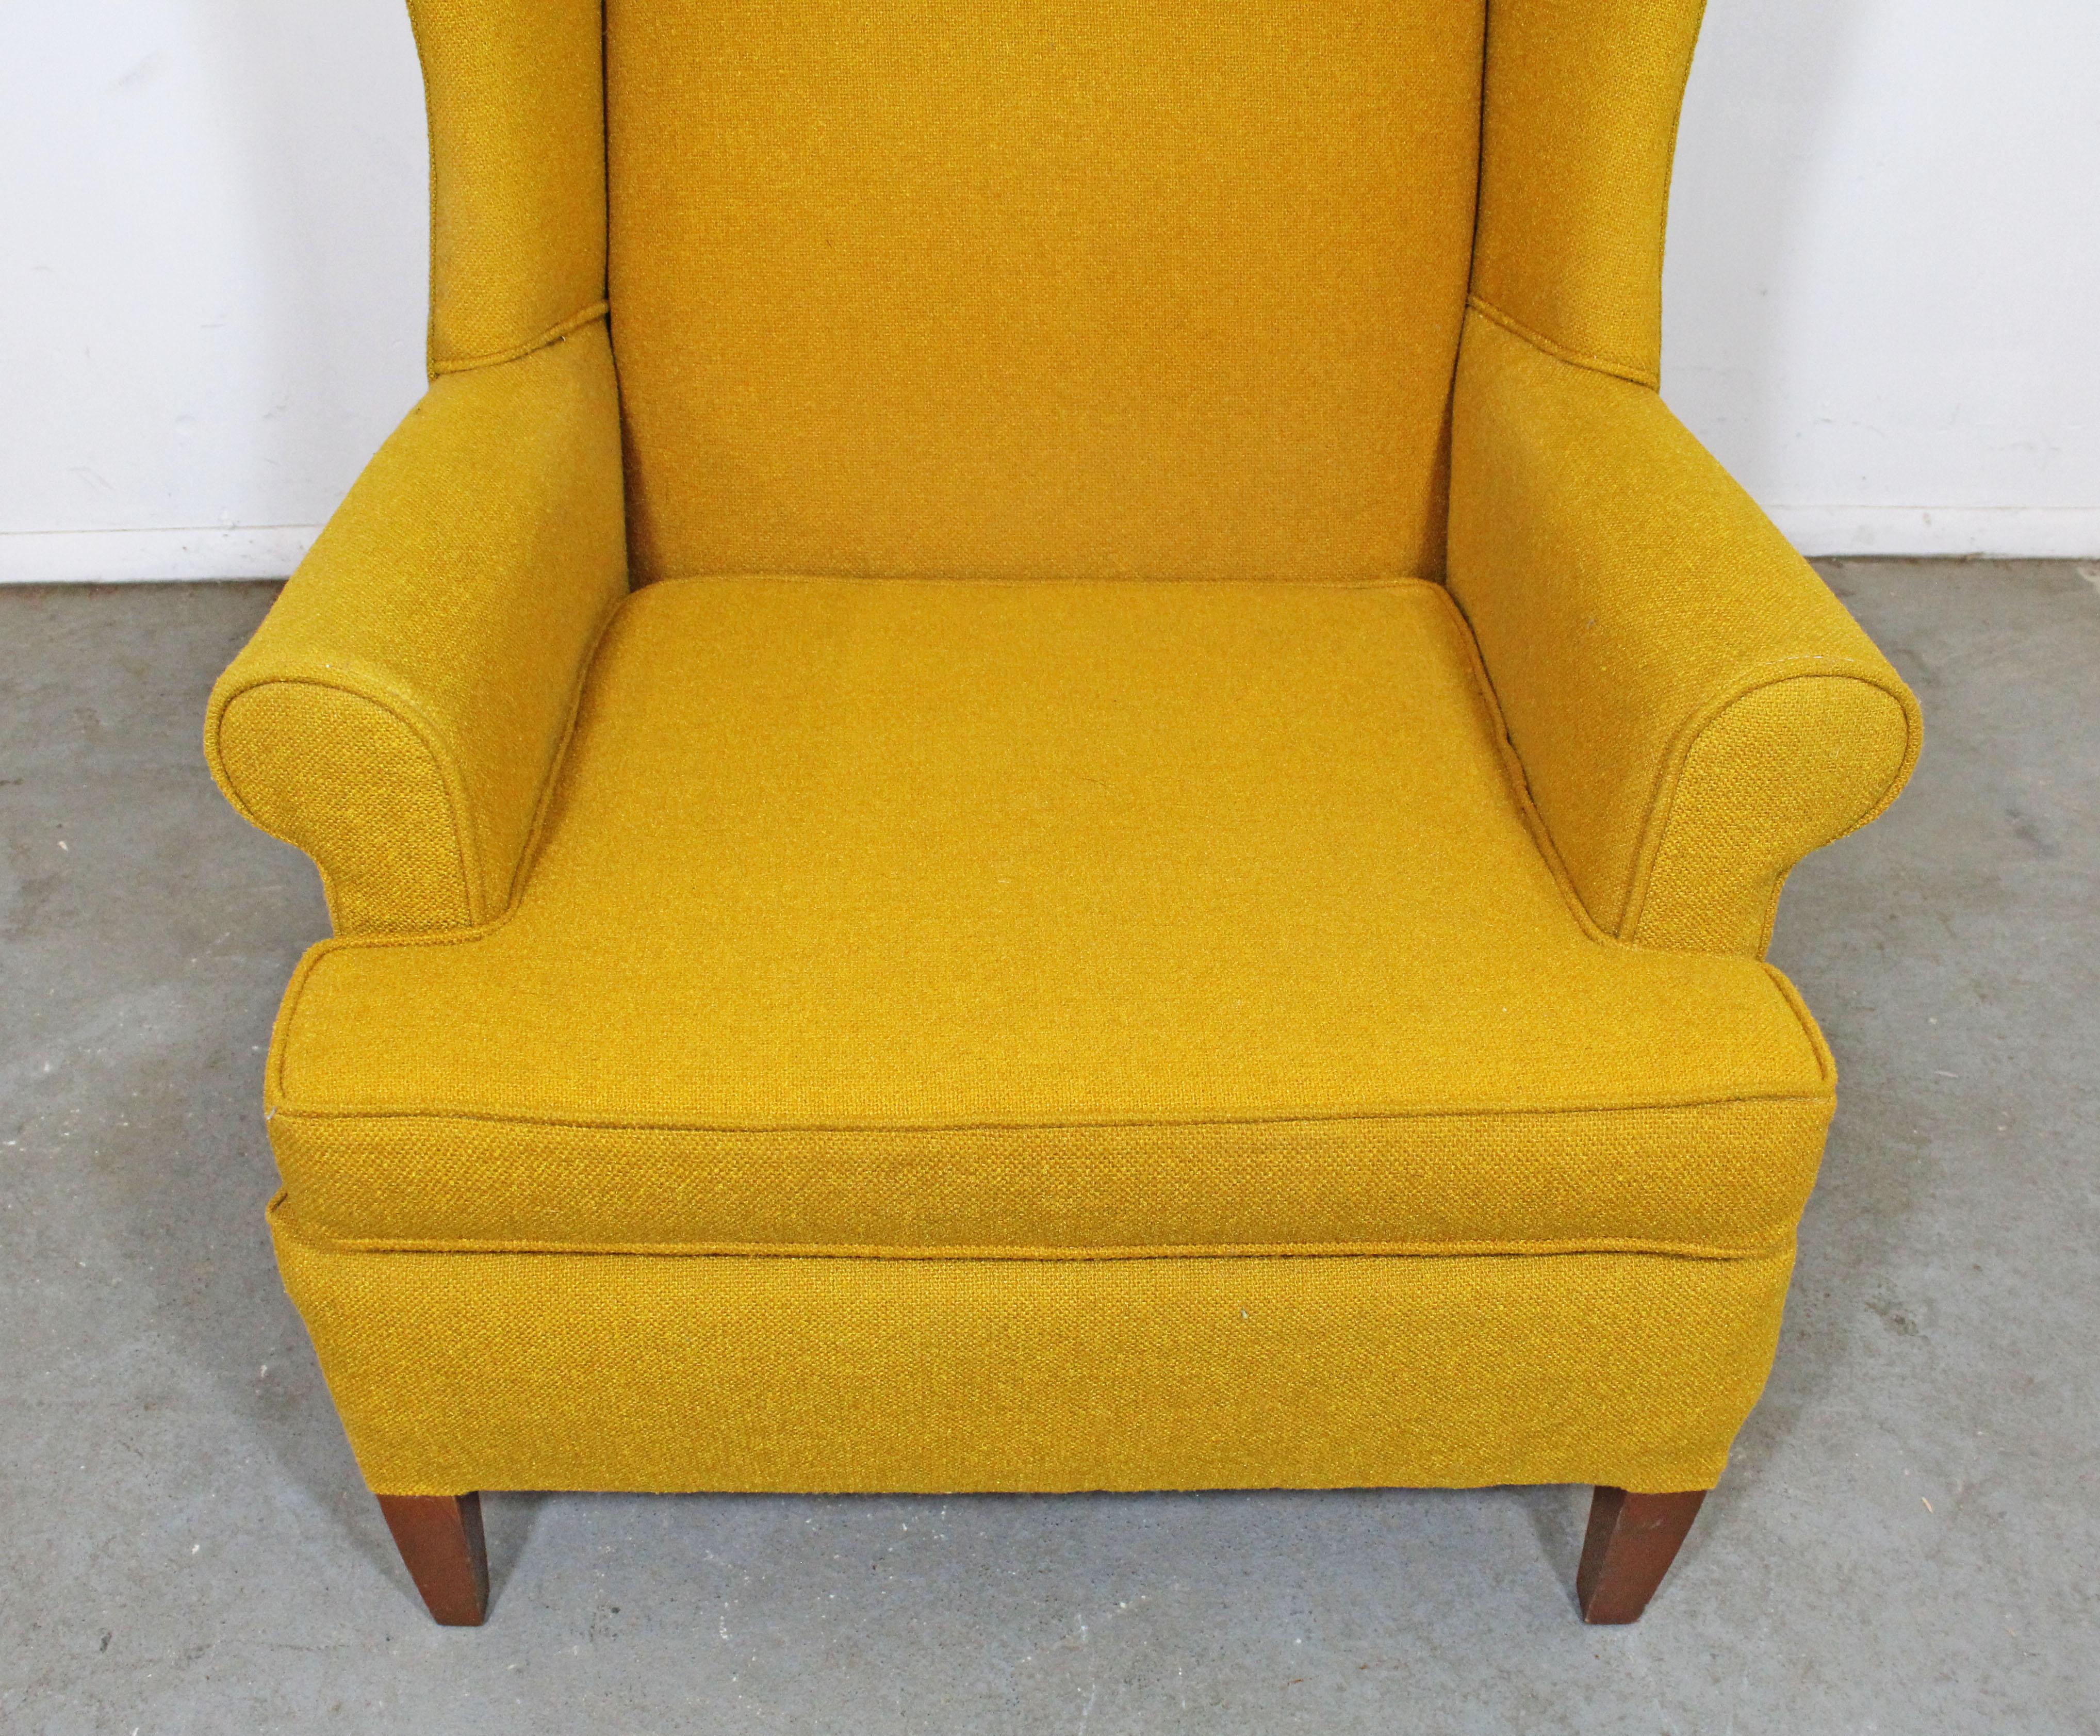 American Vintage Mid Century Fireside Wing Back Chair Mustard Yellow 